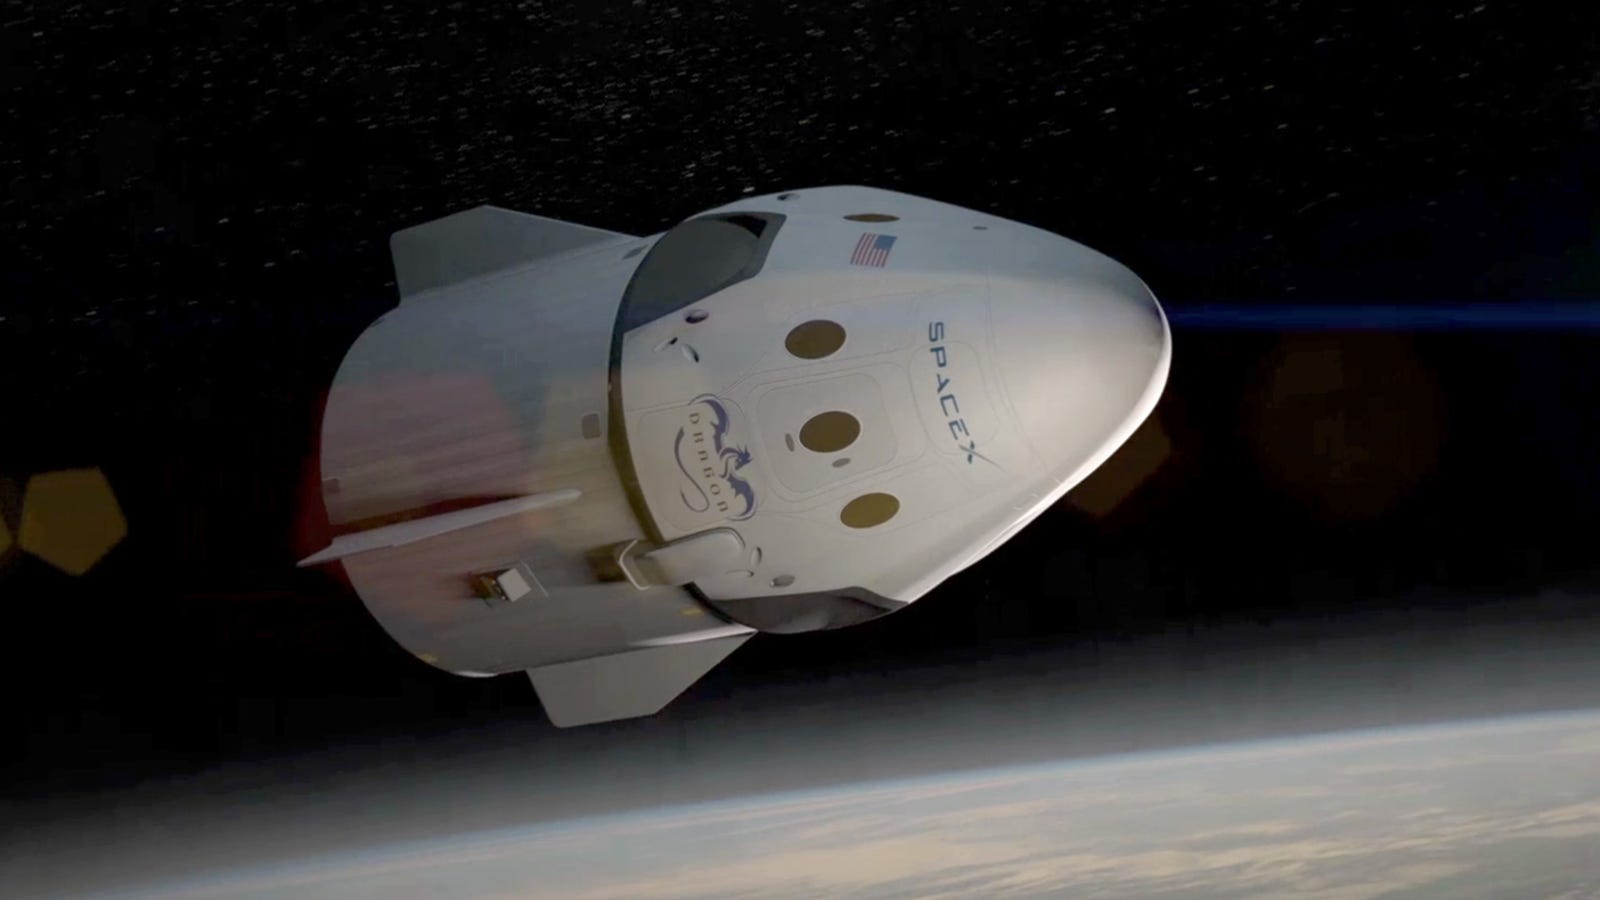 The new SpaceX Dragon V2